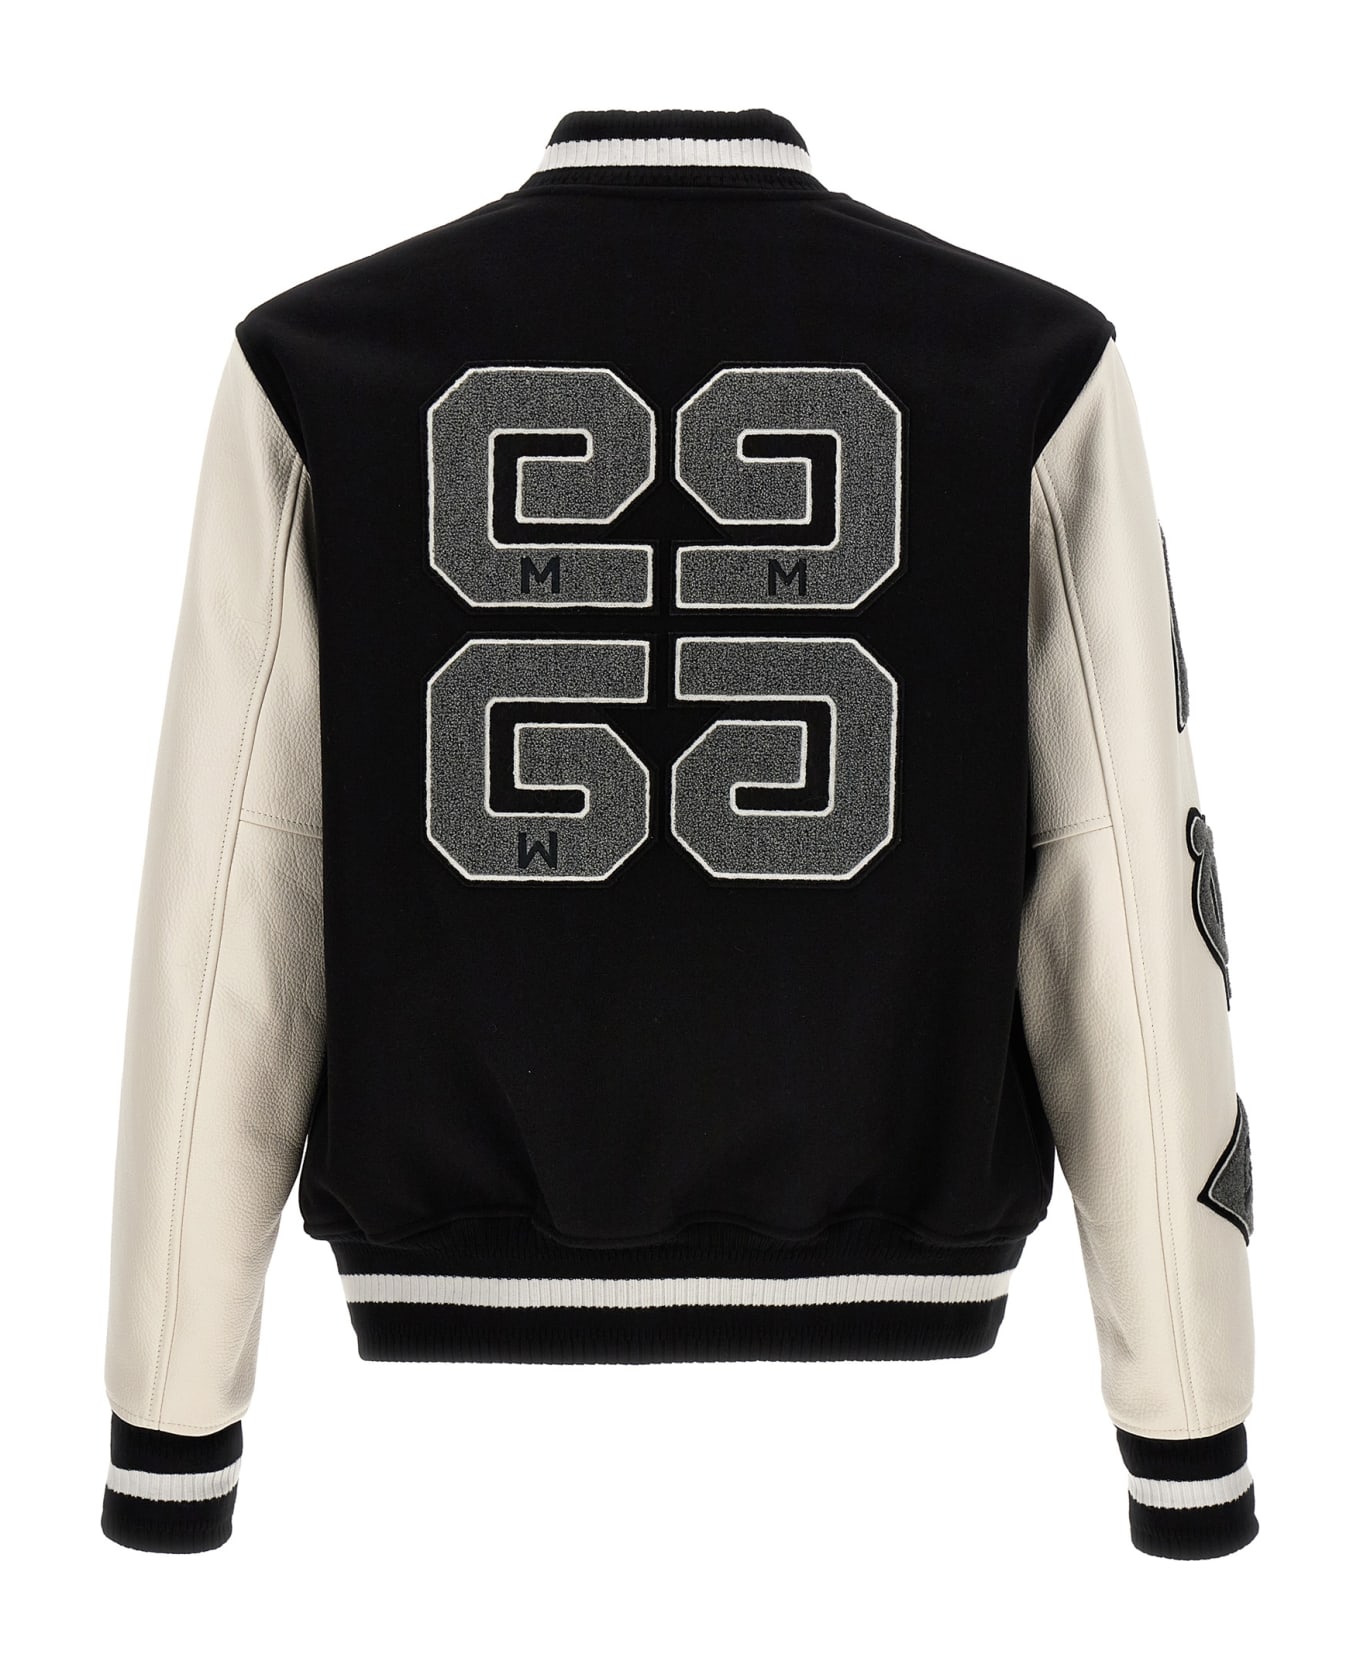 Givenchy Patches And Embroidery Bomber Jacket - White/Black